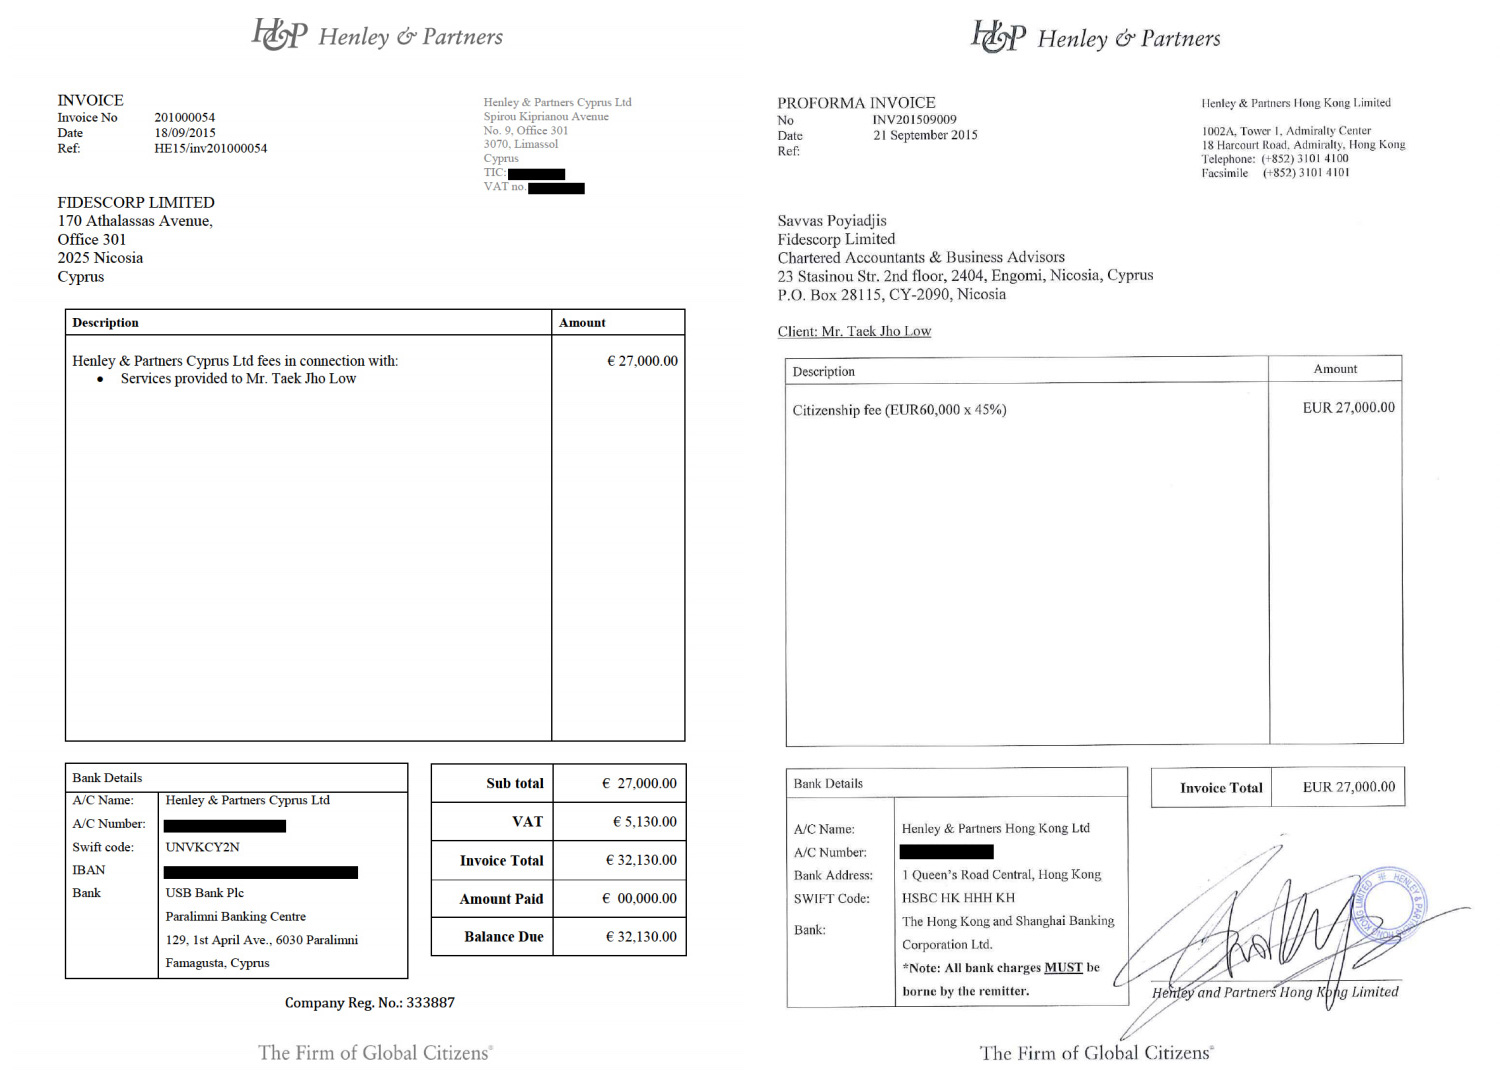 investigations/Invoices-Issued-by-Henleys-Subsidiaries2.jpg